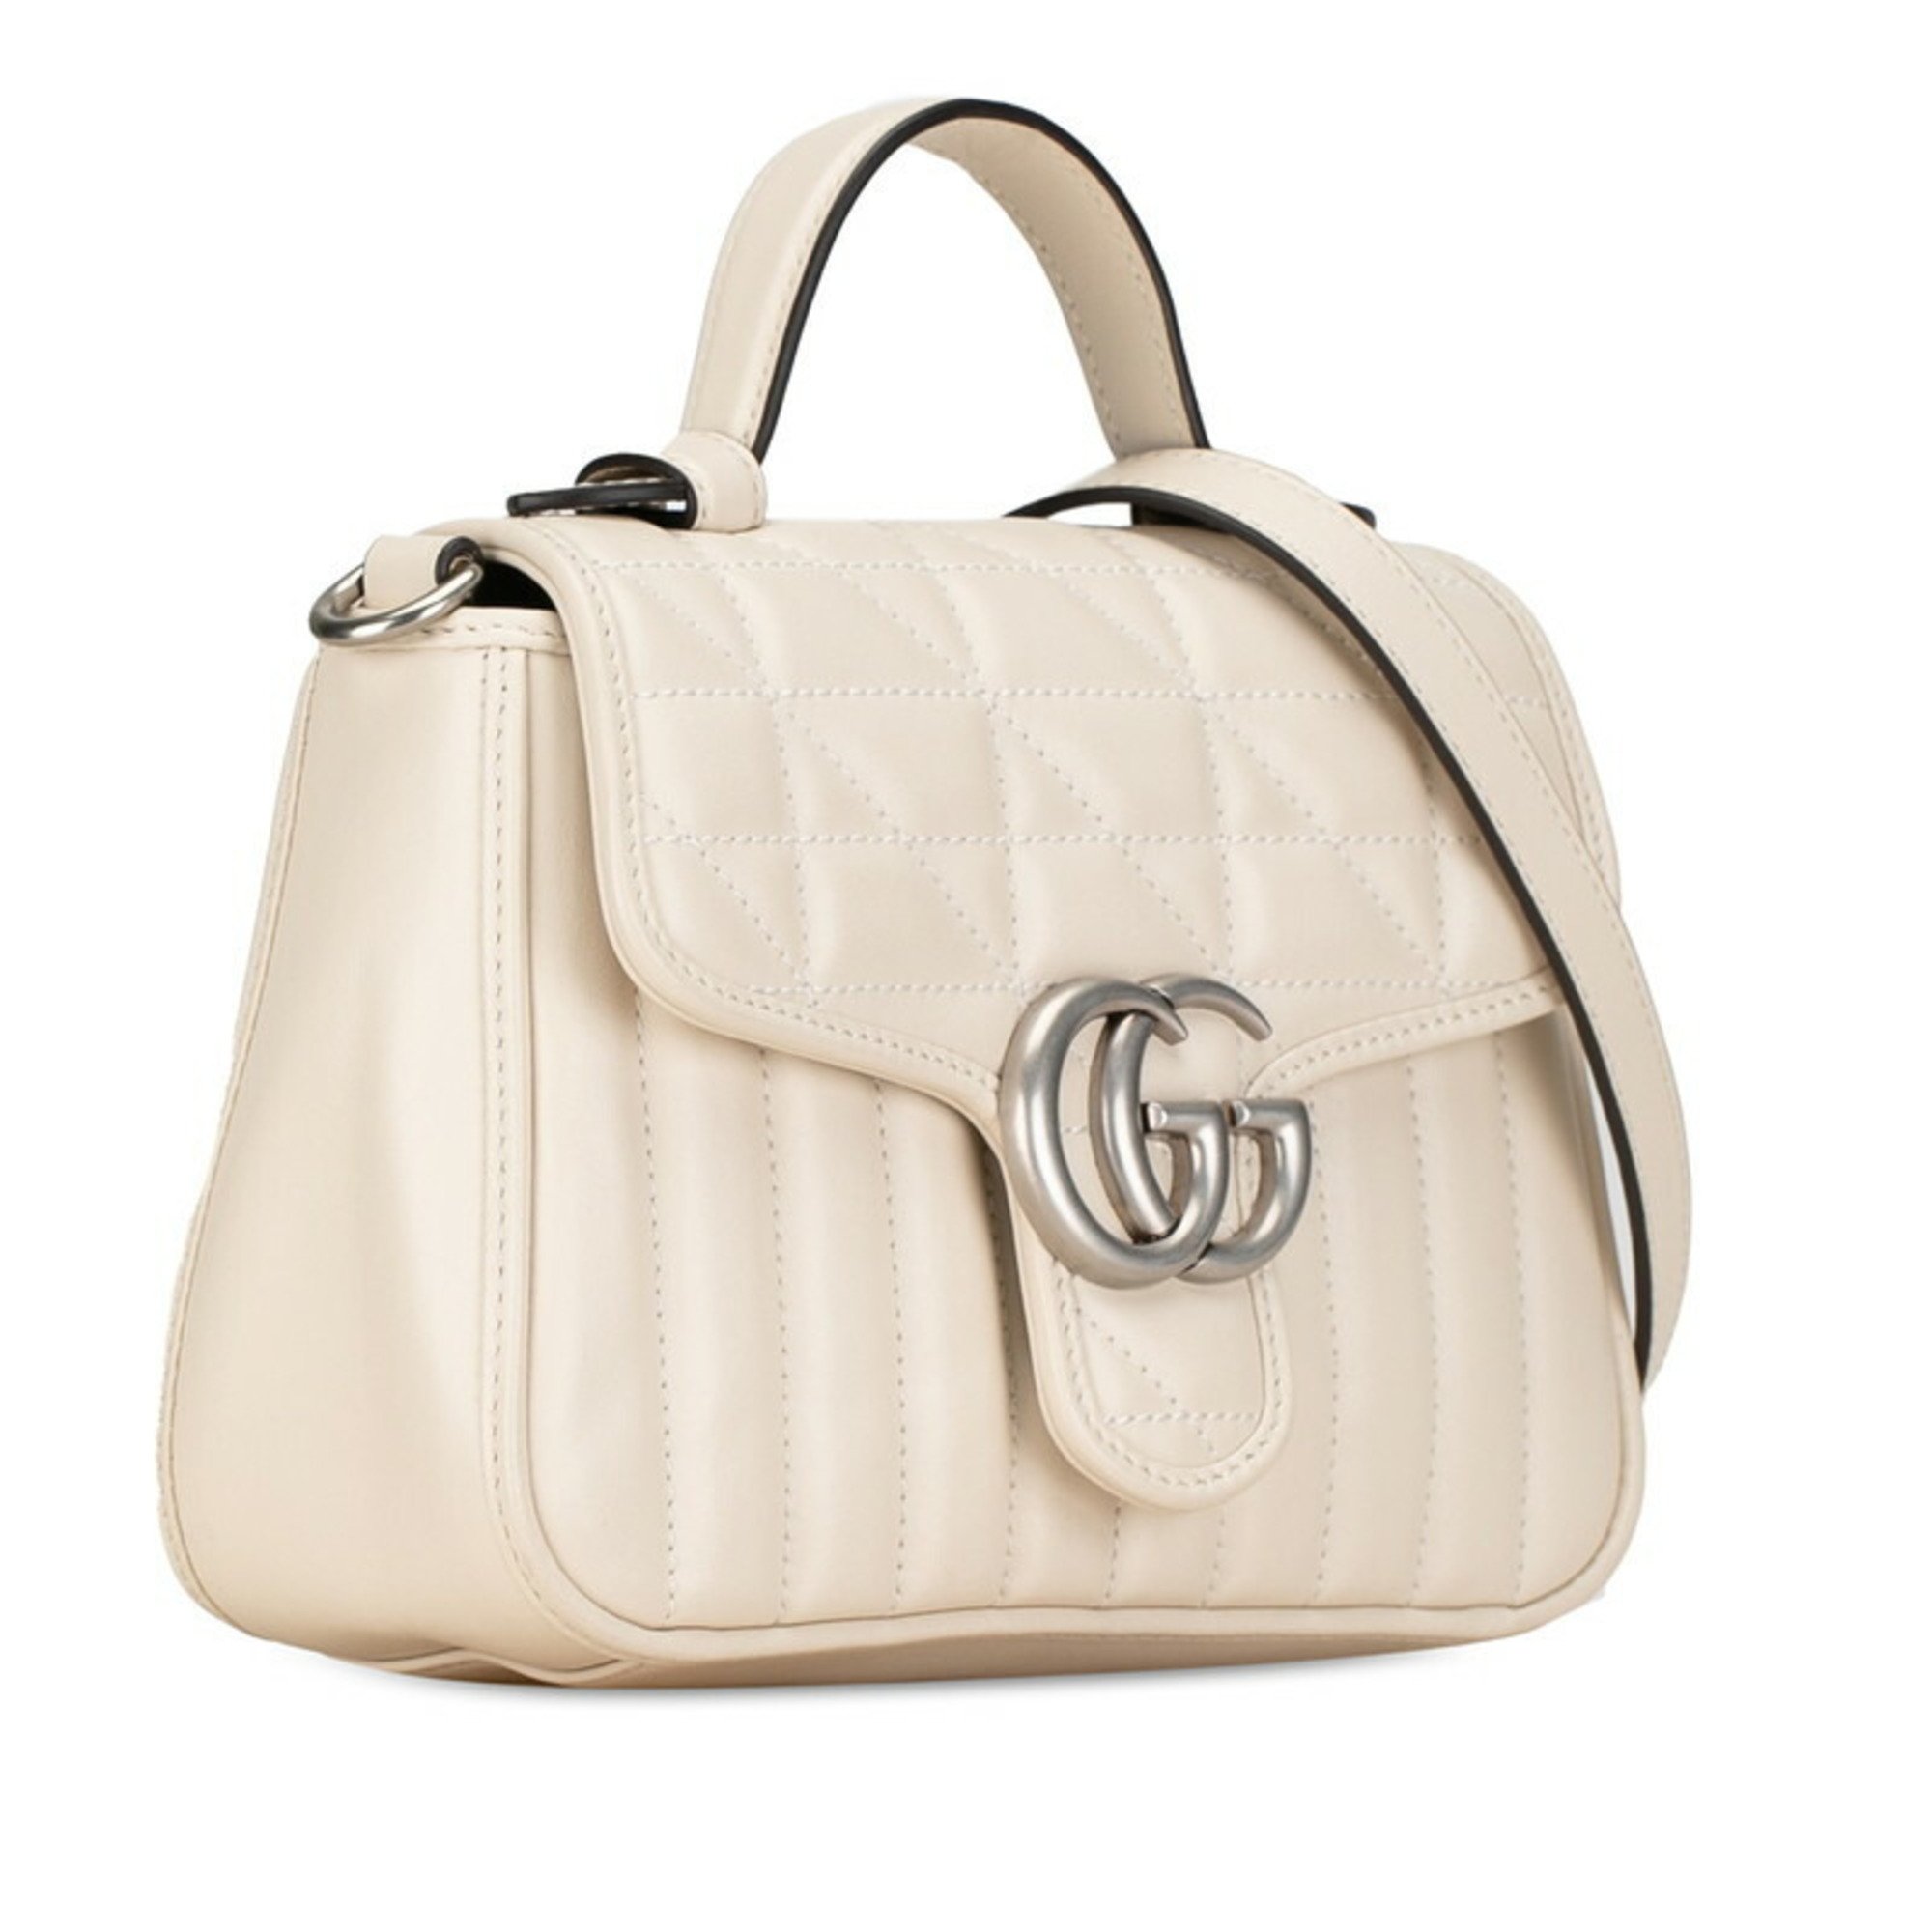 Gucci GG Marmont Bag Shoulder 583571 Ivory White Leather Women's GUCCI